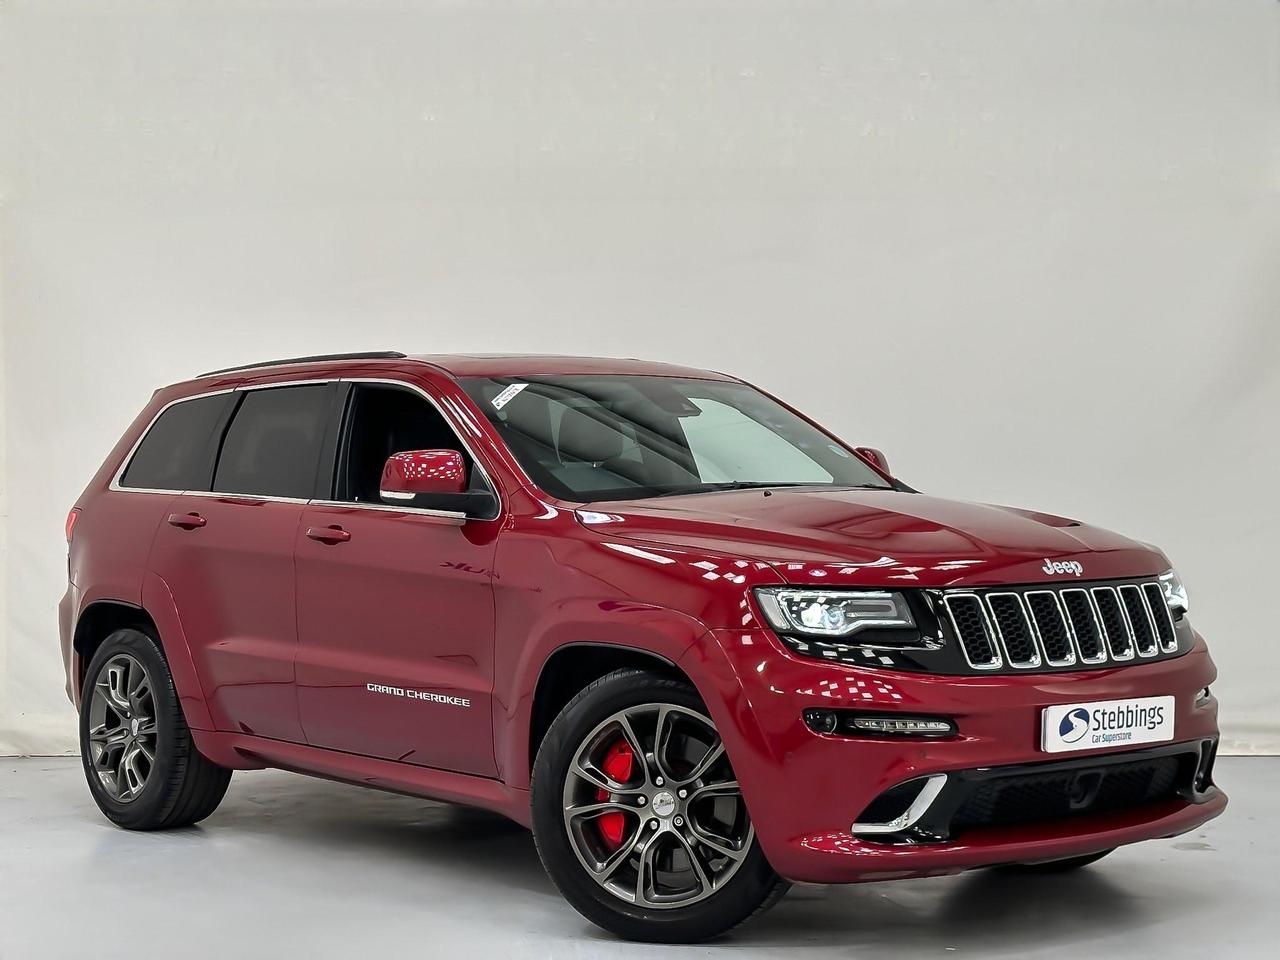 Jeep Grand Cherokee AX16TBY